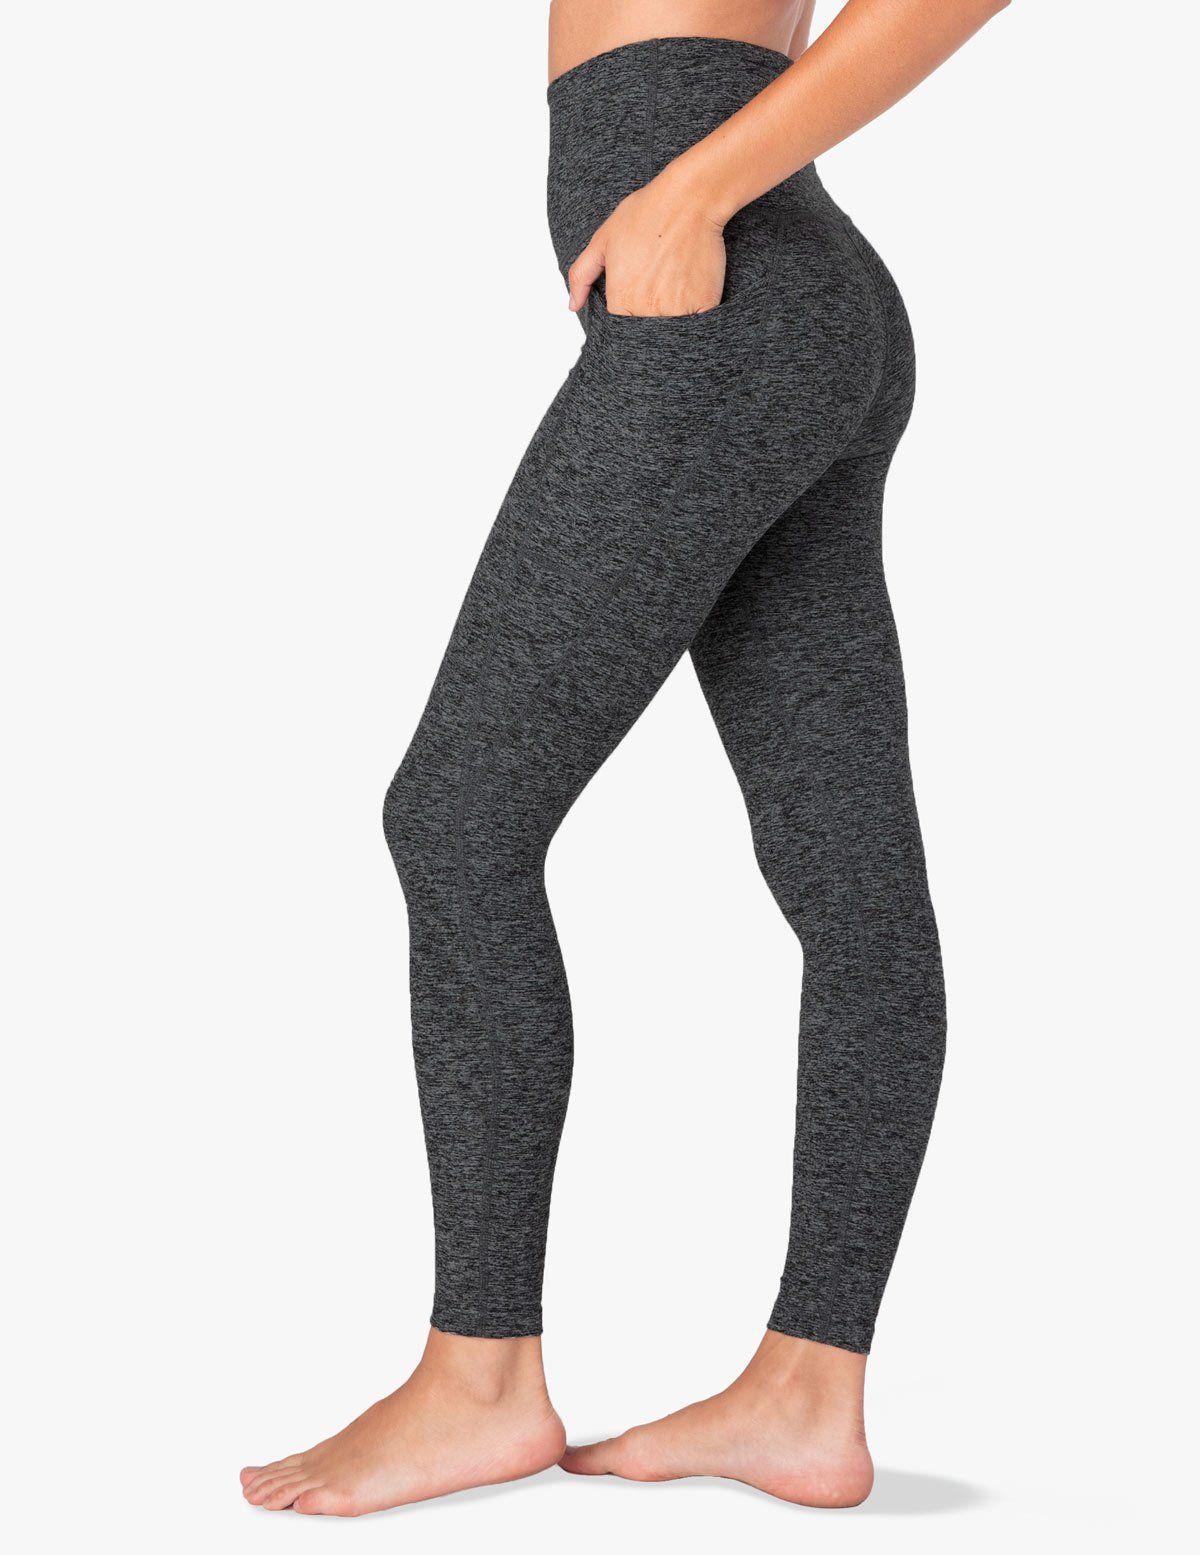 booty booster yoga pants